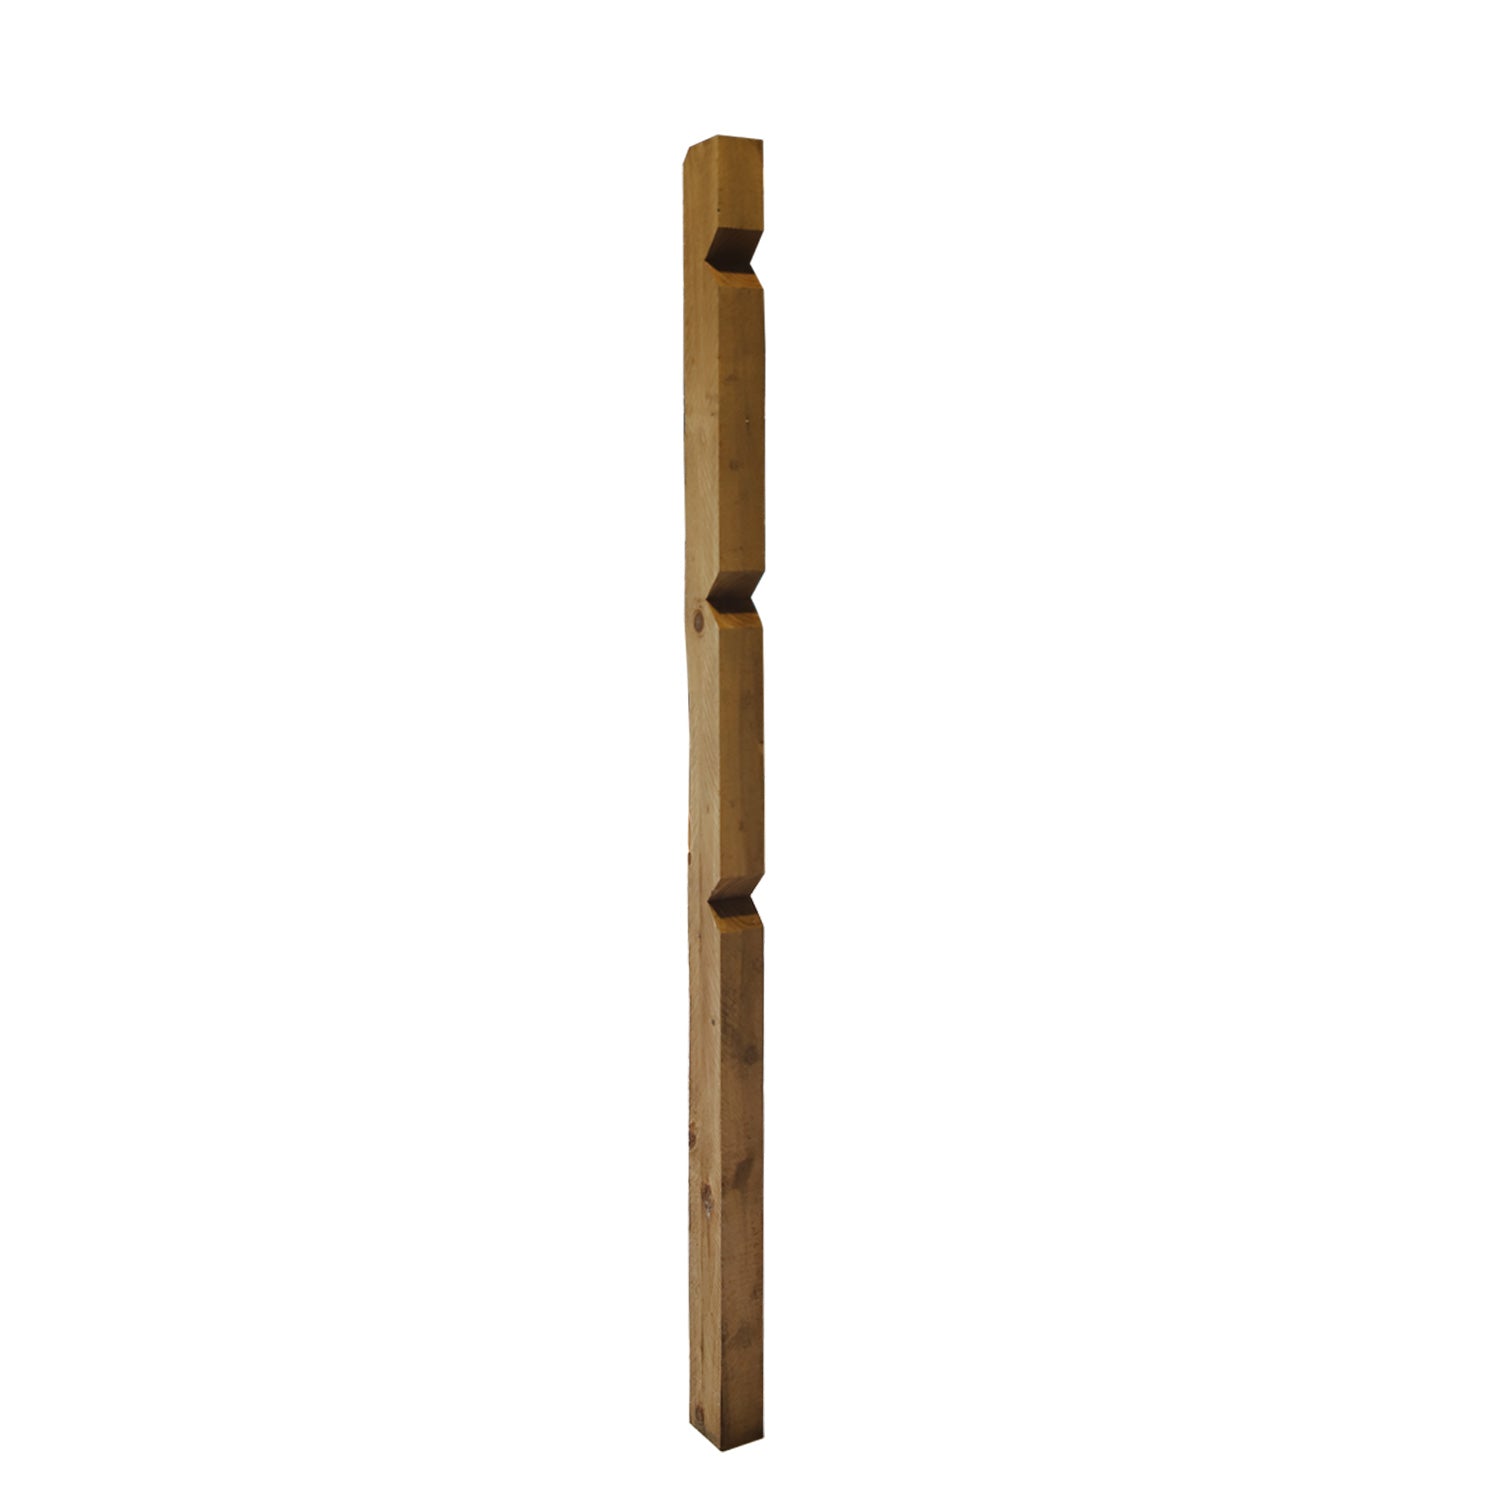 Notched Timber Post 5'' x 3'' x 8' (2.4M)